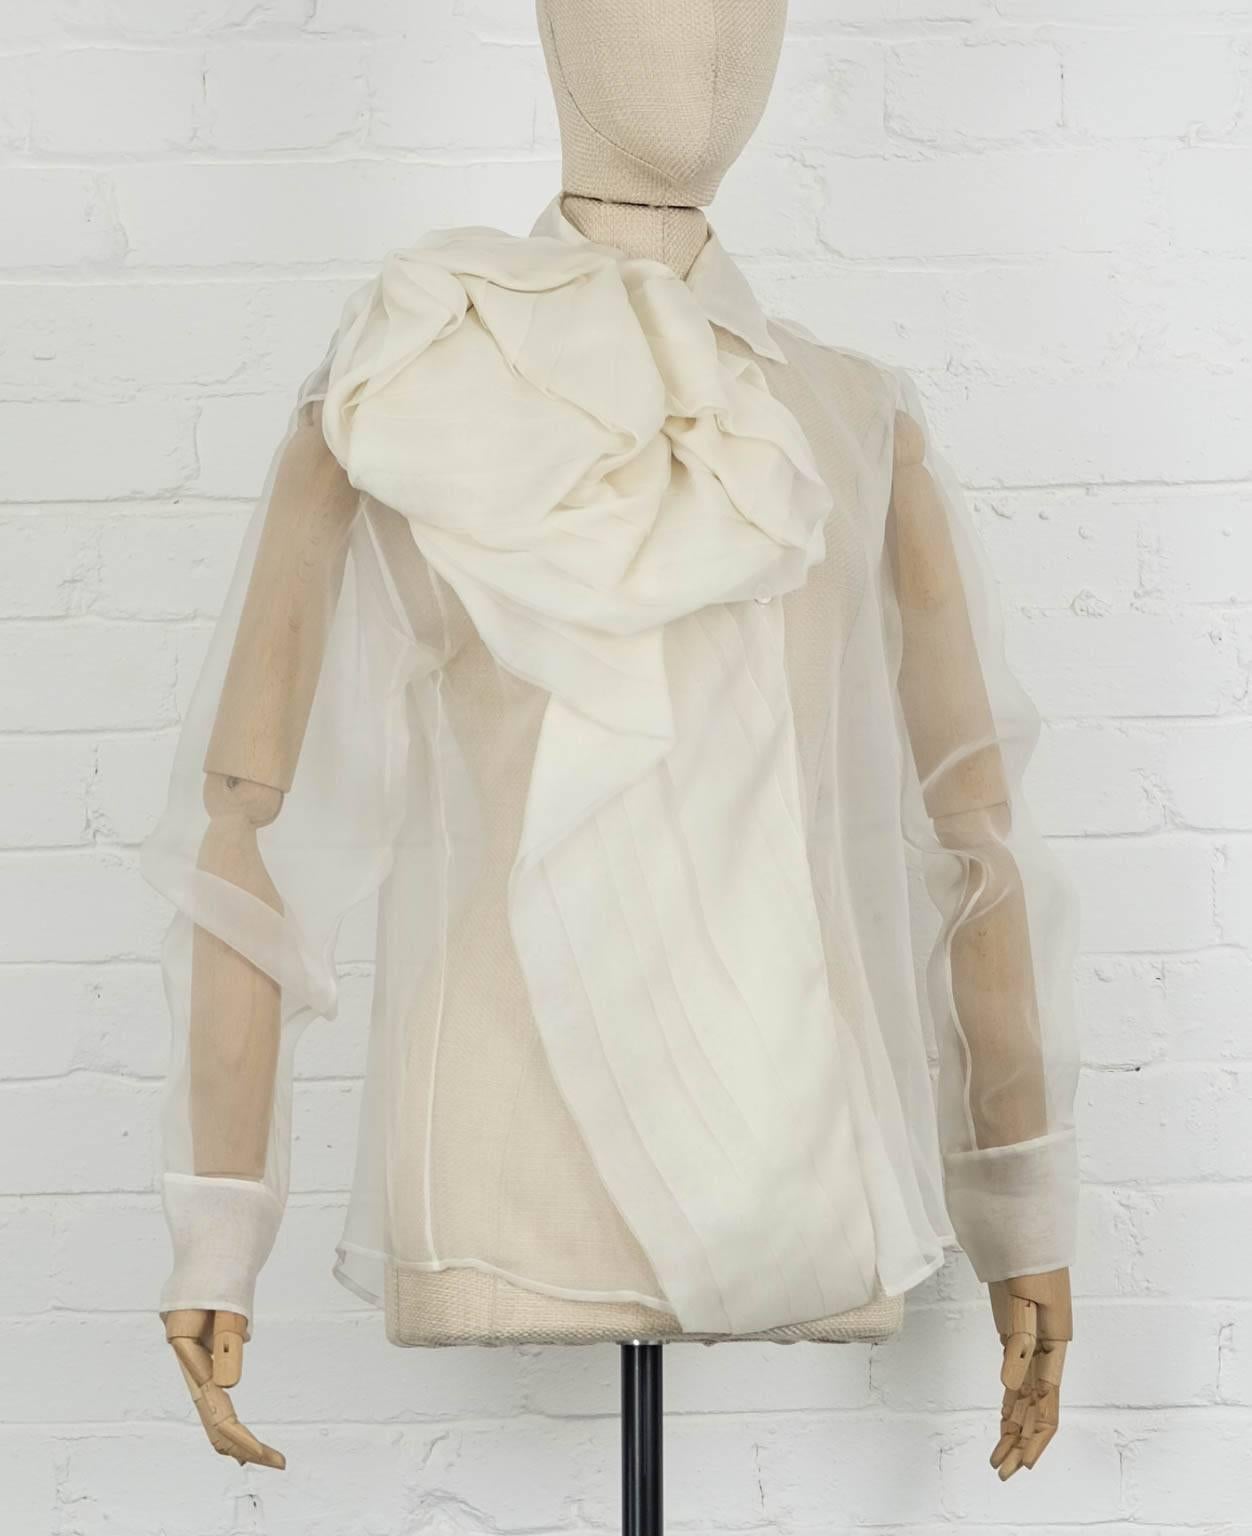 Circa 2004 White bow sheer blouse from Christian Dior by John Galliano featuring a classic collar, a front button fastening, long sleeves, button cuffs and a ruffled design. Silk 100%

Never worn before.

Shoulder 45cm
Sleeve length 63 cm